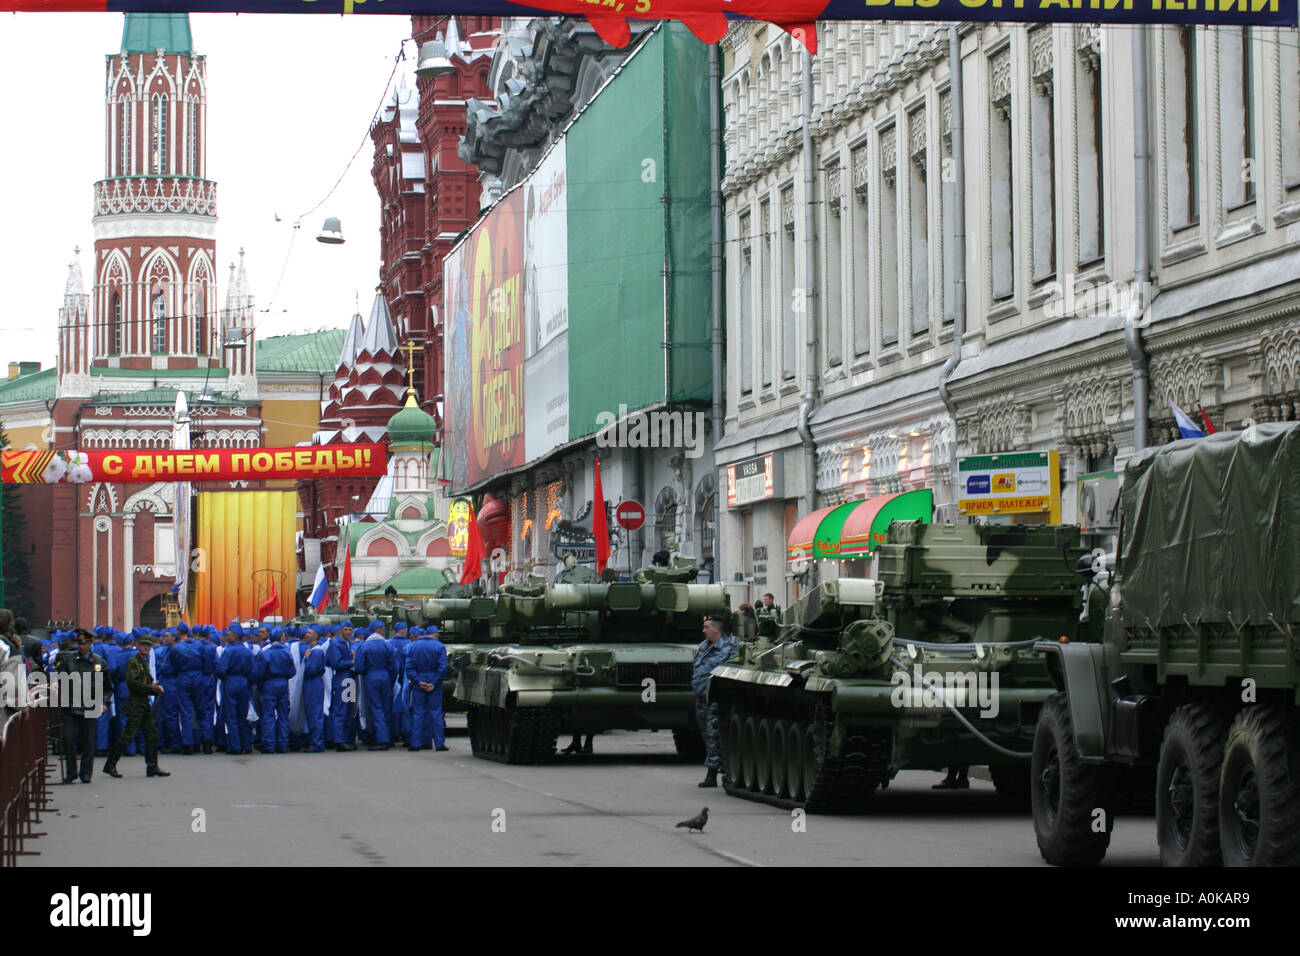 Preparation of the celebration of Victory Day in Moscow, Russia. May 8th, 2005 Stock Photo